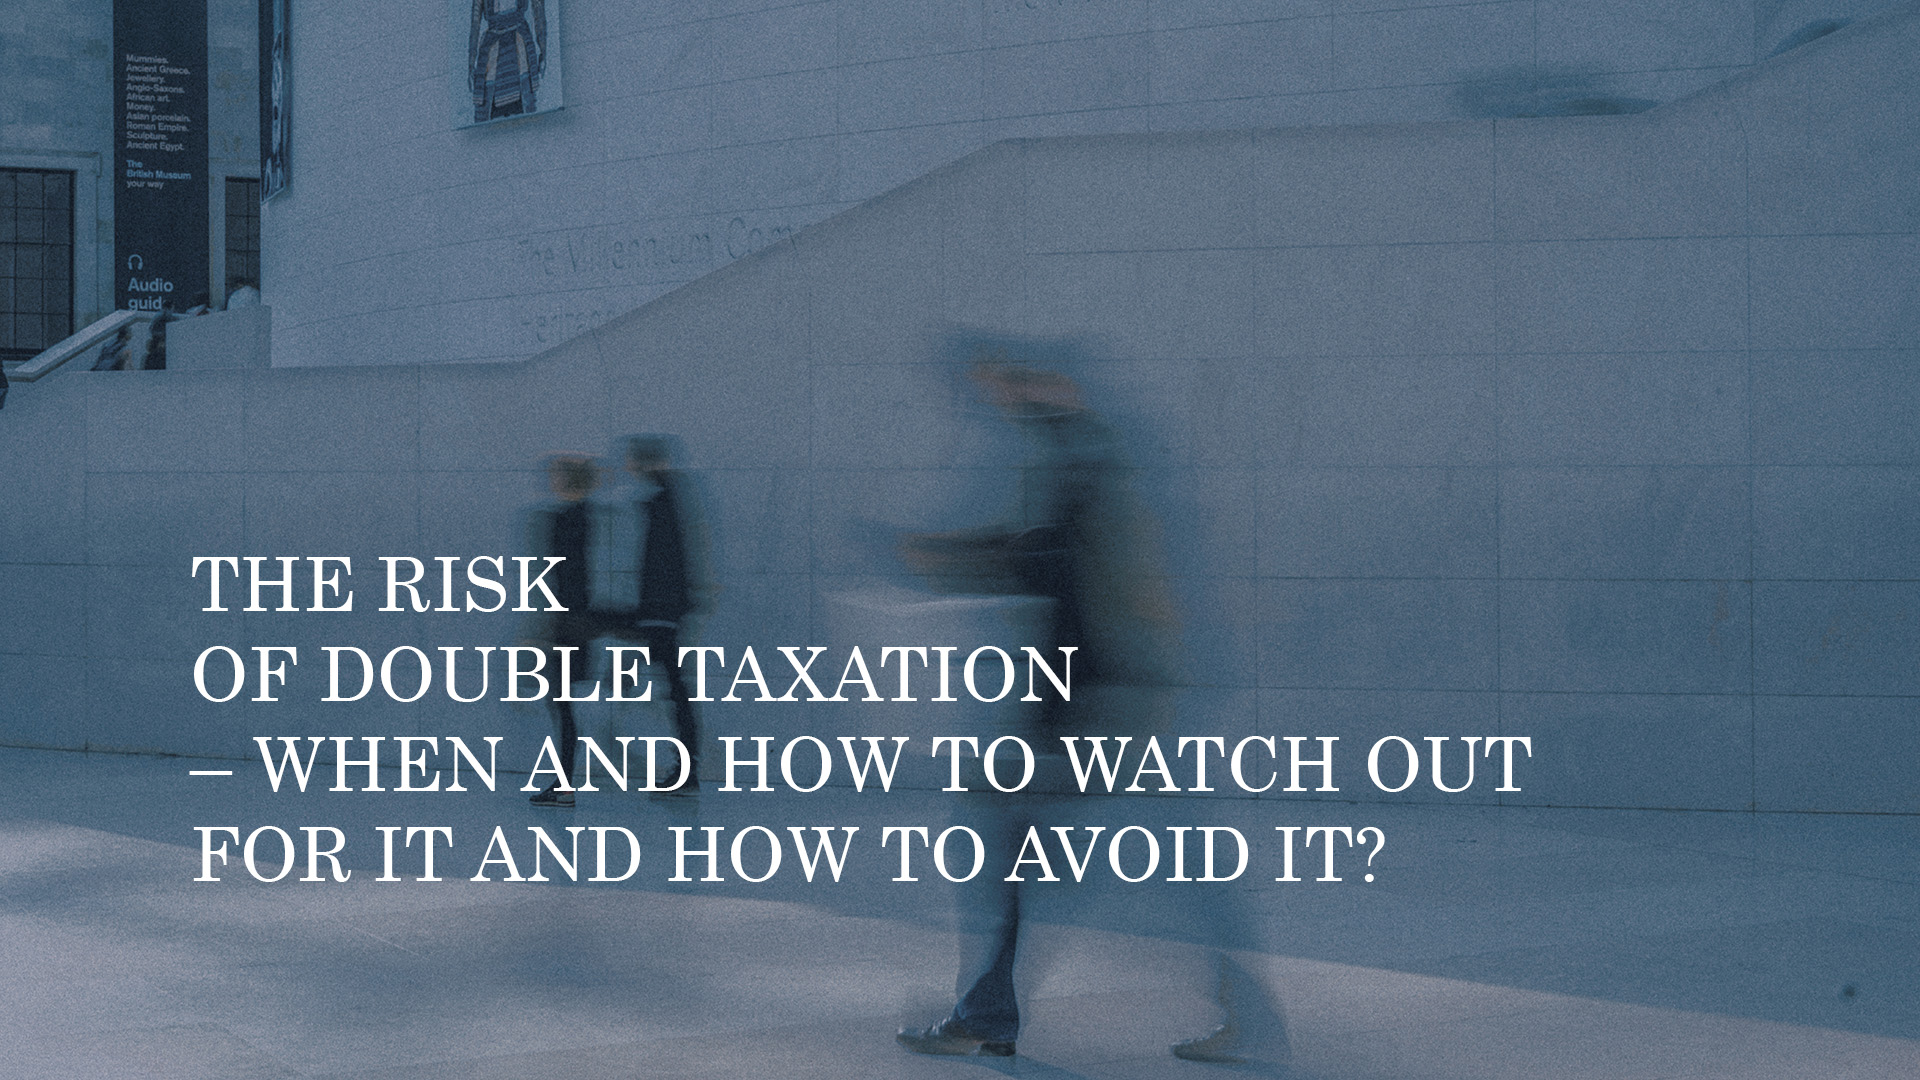 THE RISK OF DOUBLE TAXATION – WHEN AND HOW TO WATCH OUT FOR IT AND HOW TO AVOID IT?